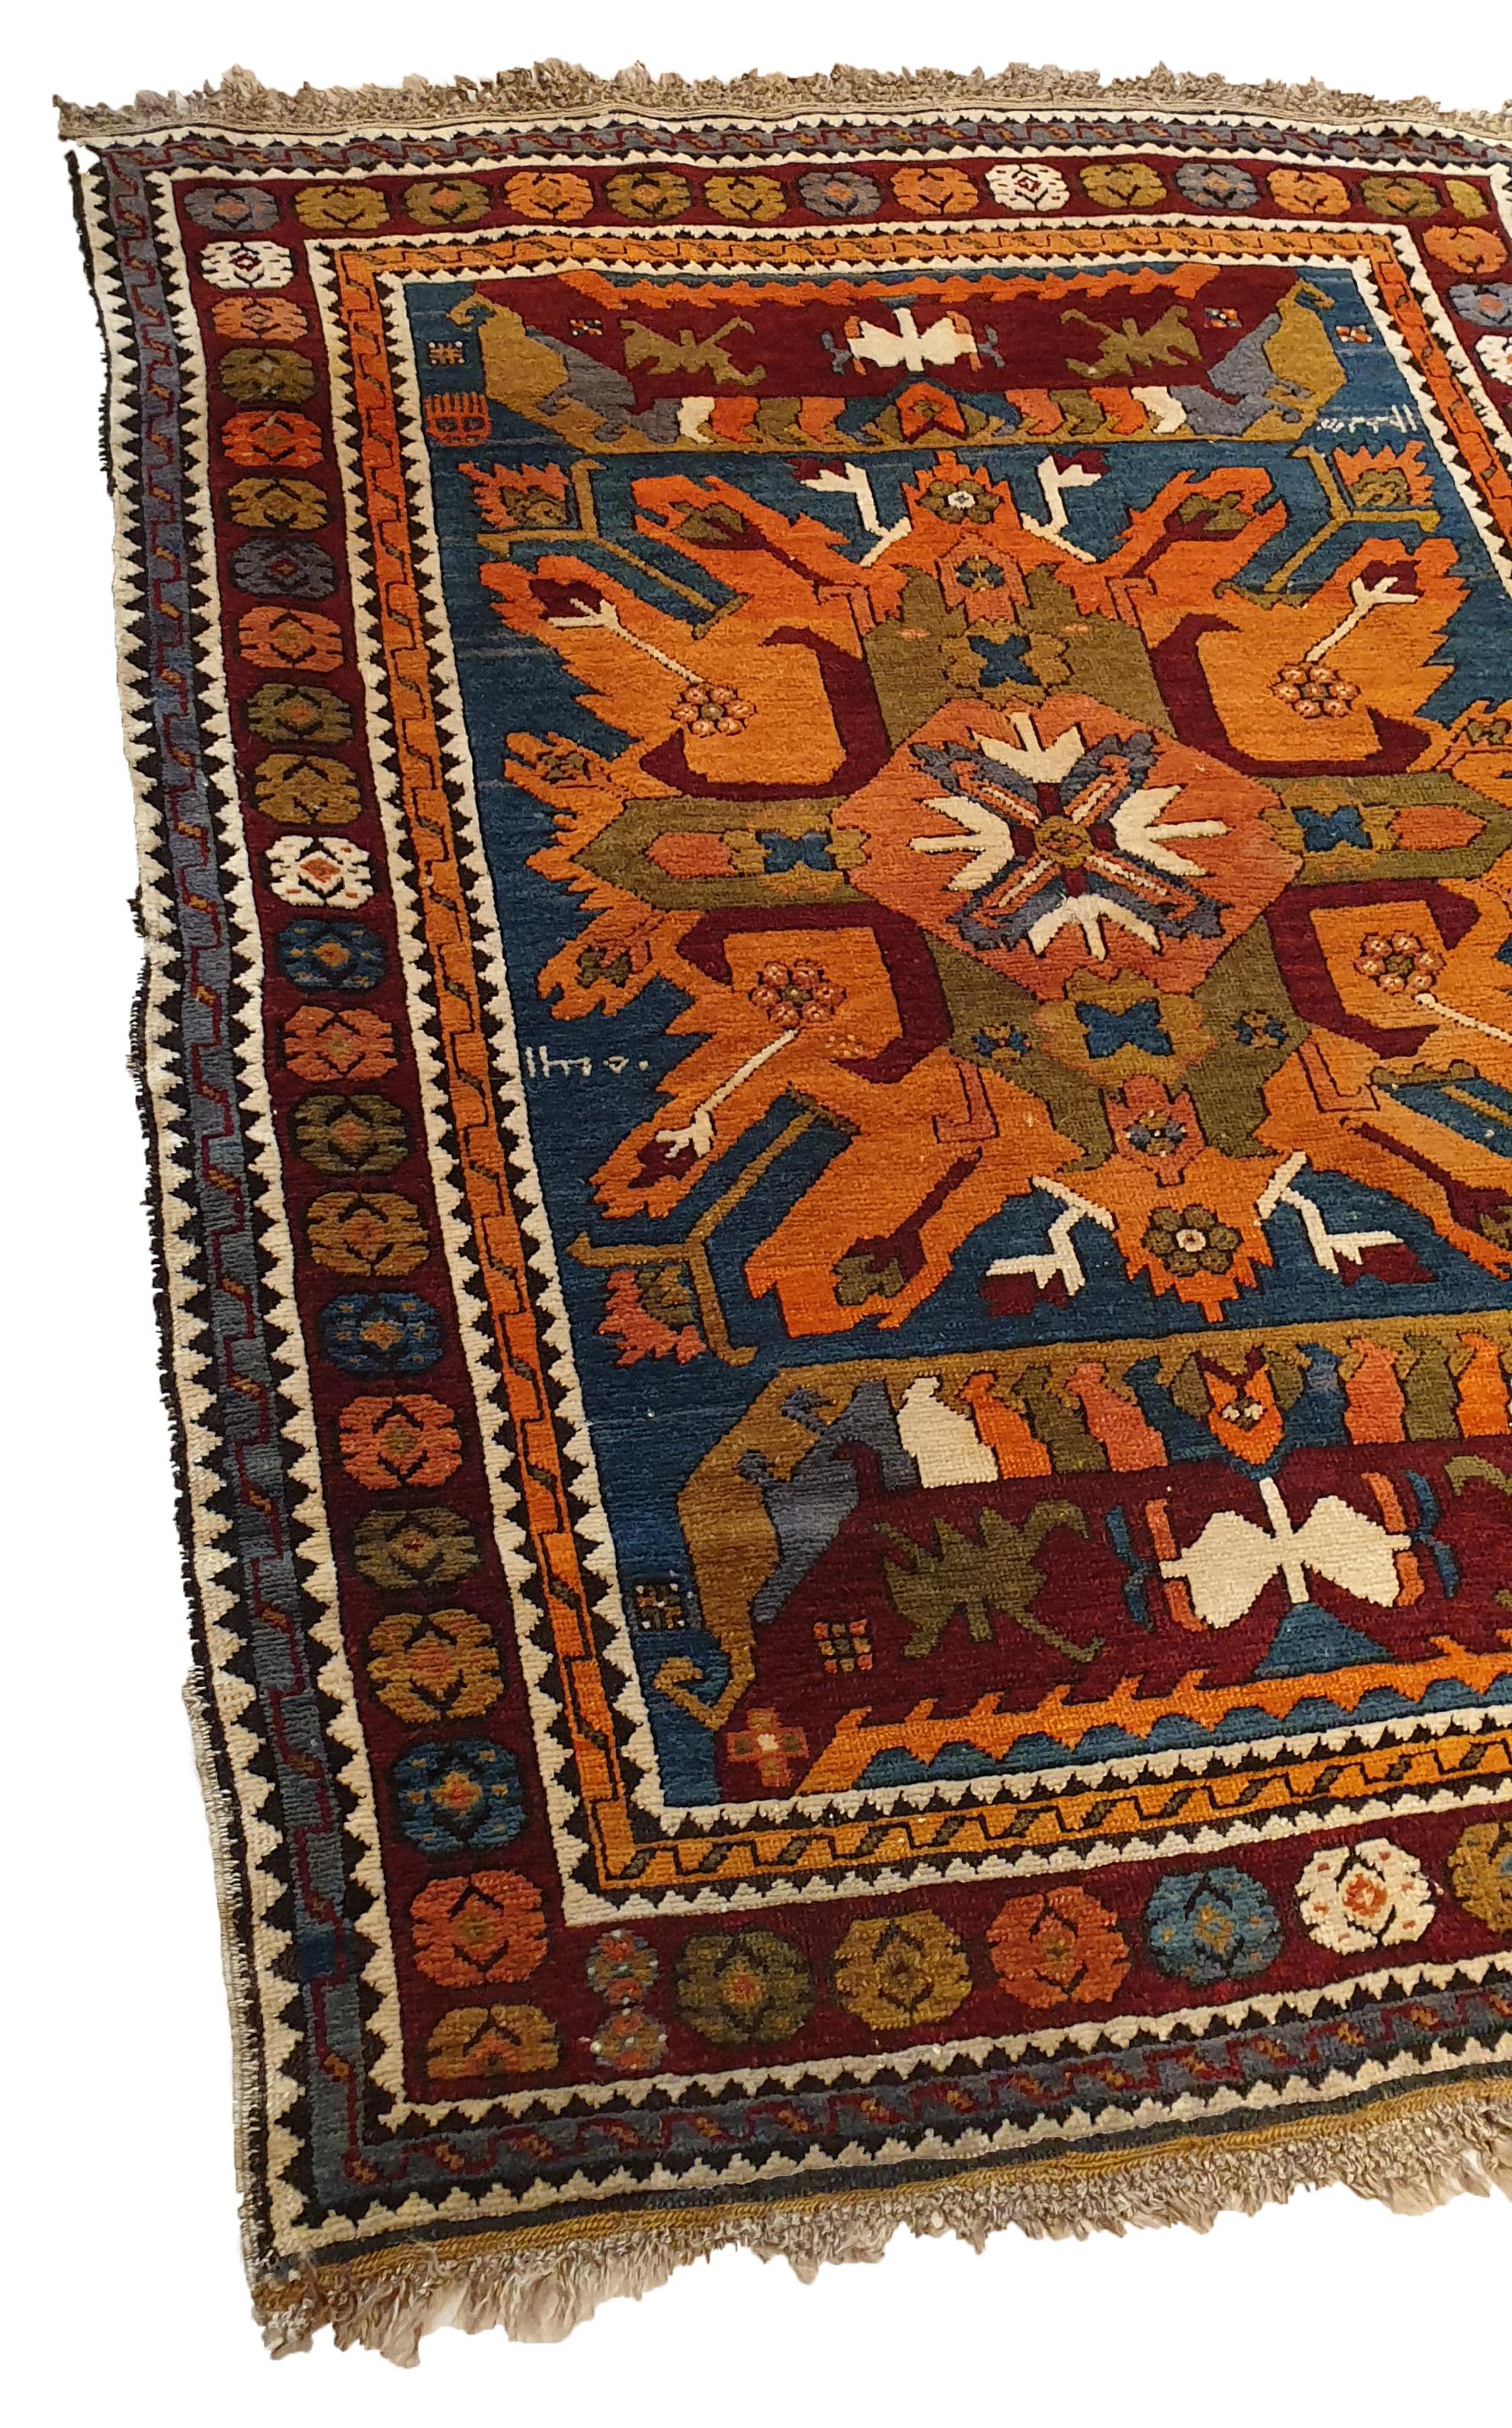 N° 734 - Hand knotted carpet in Turkish factory from 19th century.
High quality, beautiful graphics and remarkable finesse.
Perfect state of preservation.

Measures: 150 x 115 cm.